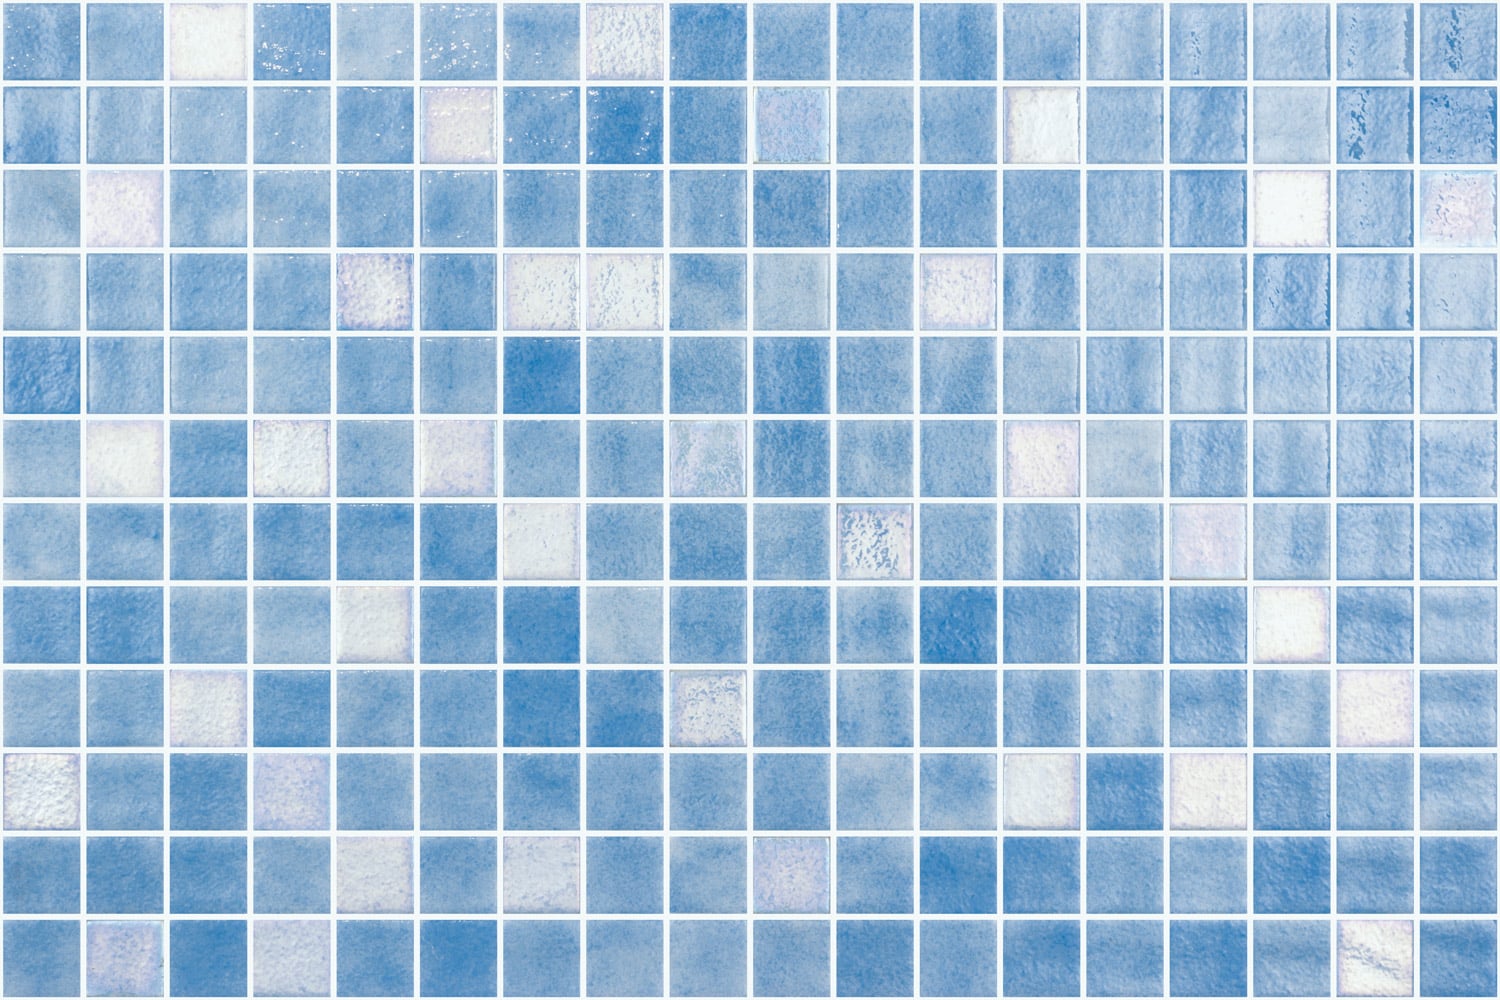 OPALITE AZUL CELESTE_RMS TRADERS_NATURAL STONE POOL MOSAIC SUPPLIER MELBOURNE (1)